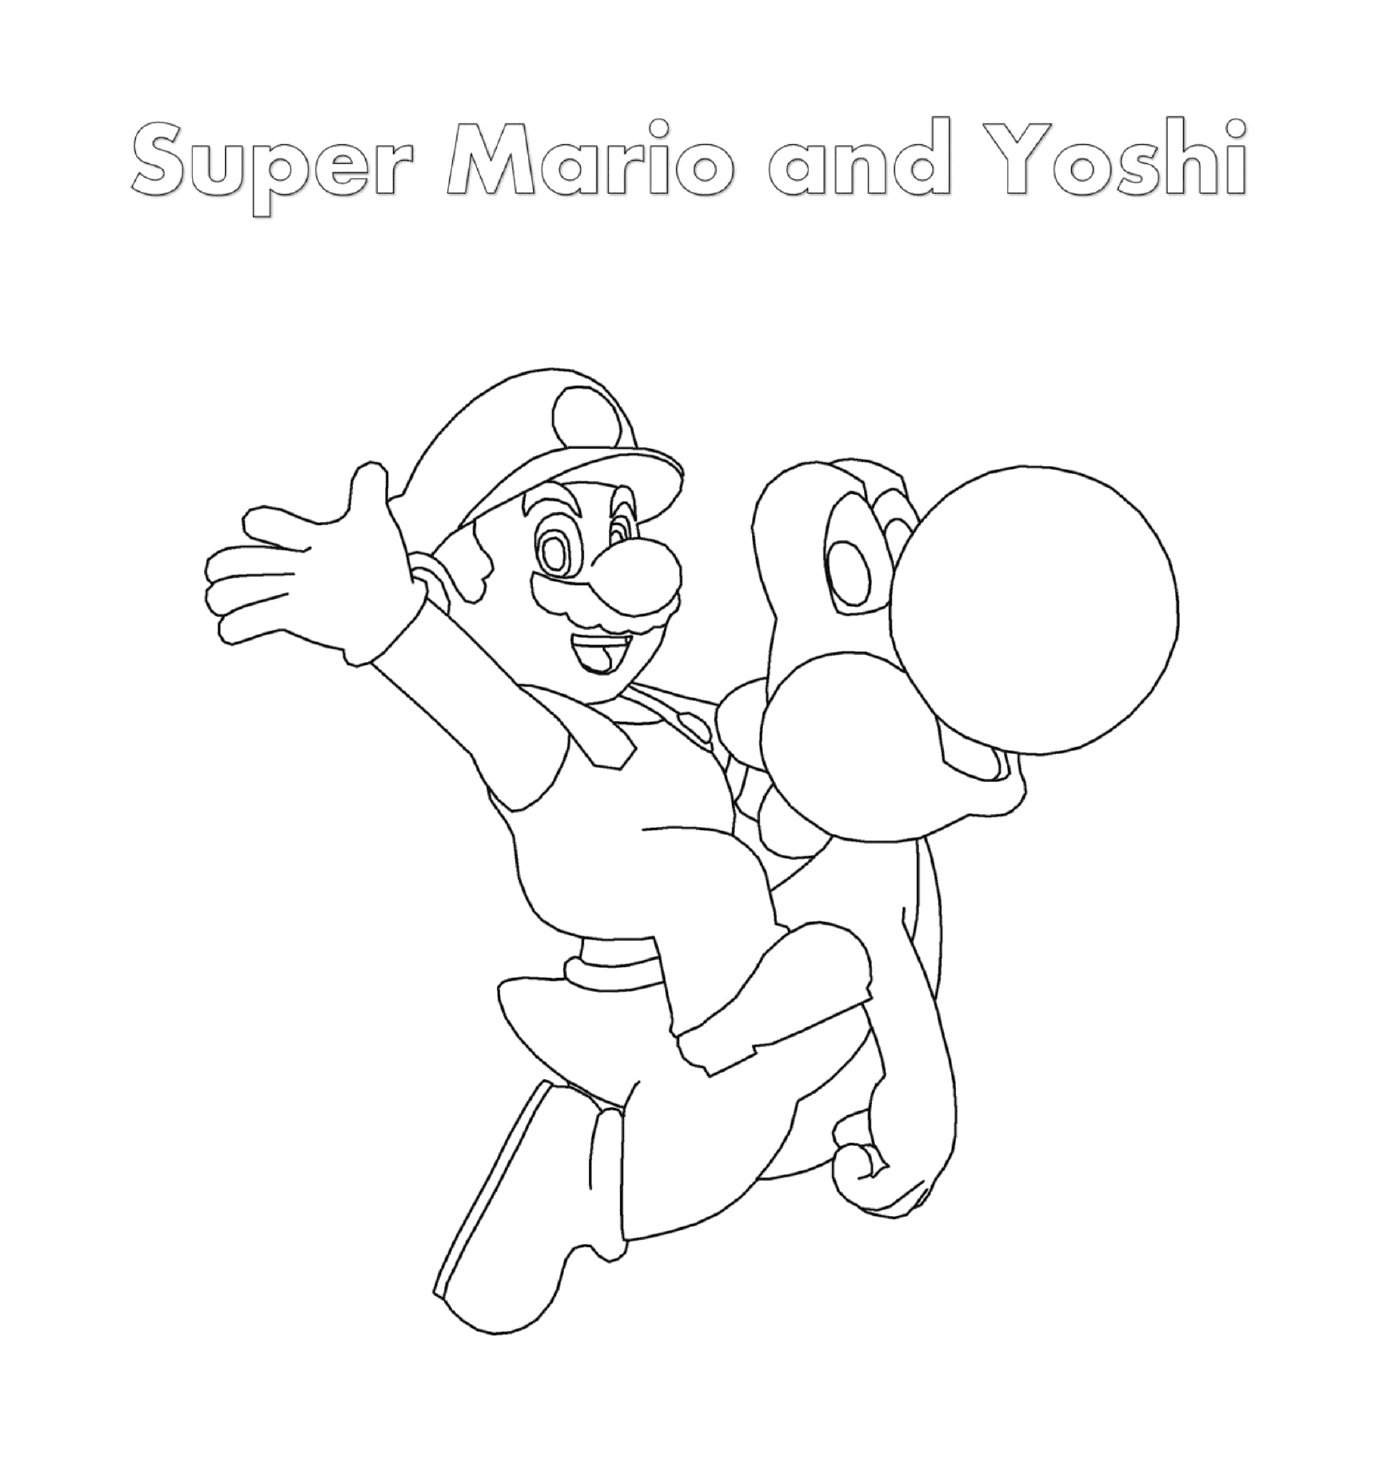  Super Mario and Yoshi with a person holding a bullet 